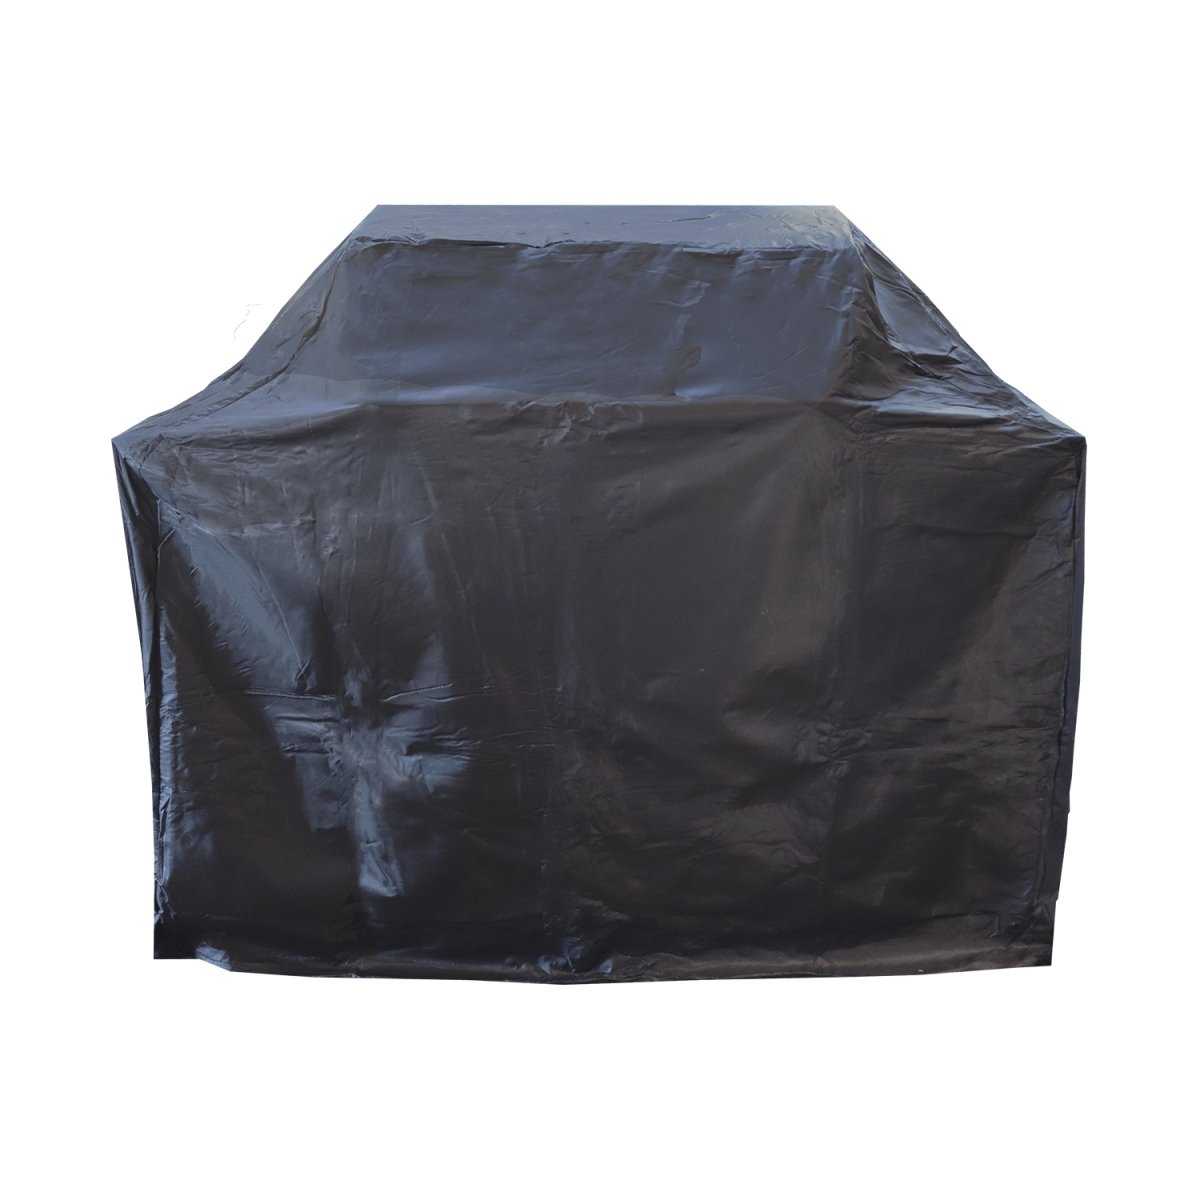 RCS Grill Cover for RCS Premier 40" Cart Grill - GC42C - Texas Star Grill Shop GC42C